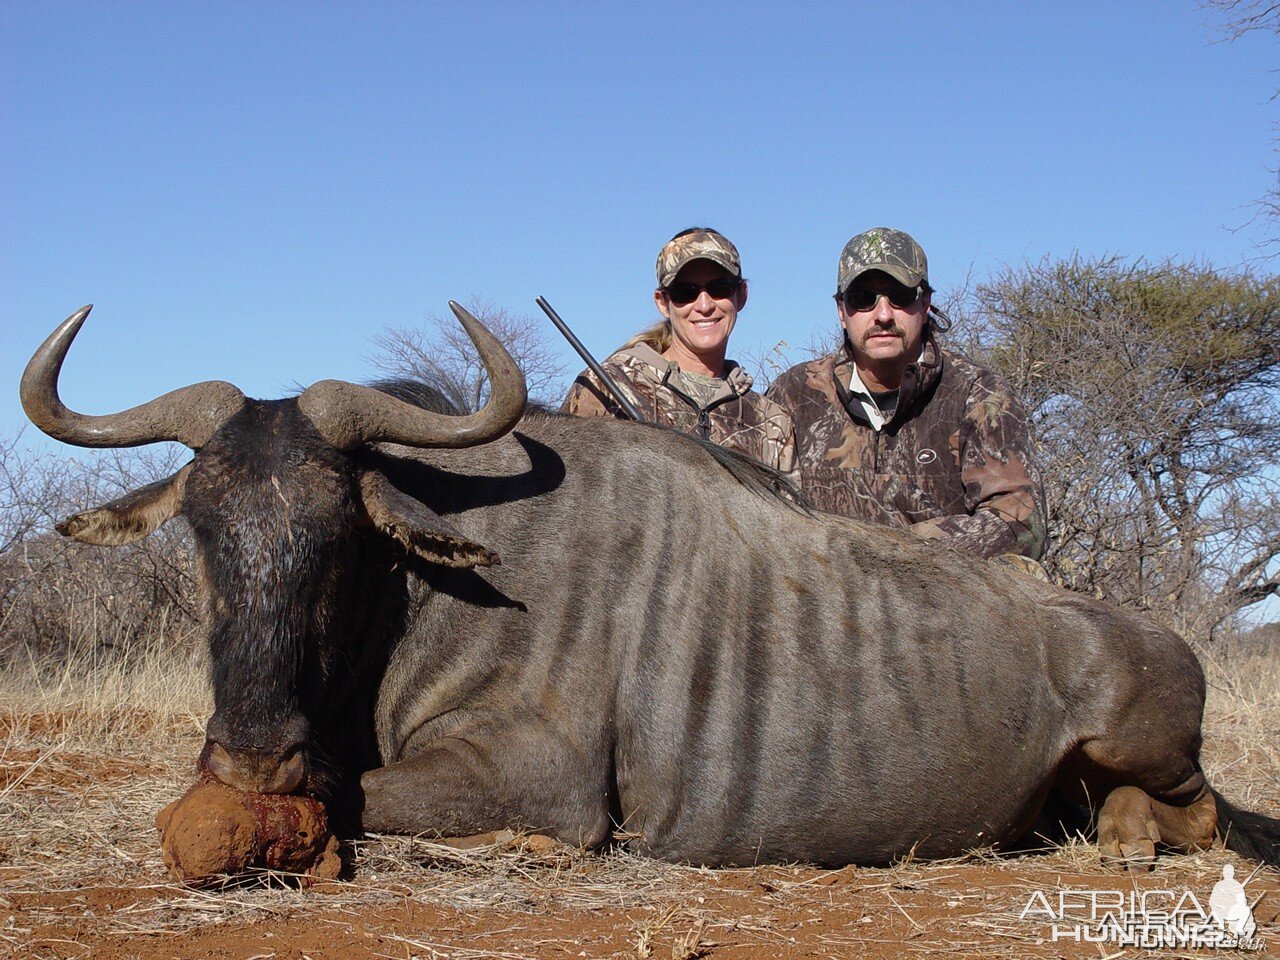 Lisa's Blue Wildebeest with Limcroma Safaris 2009